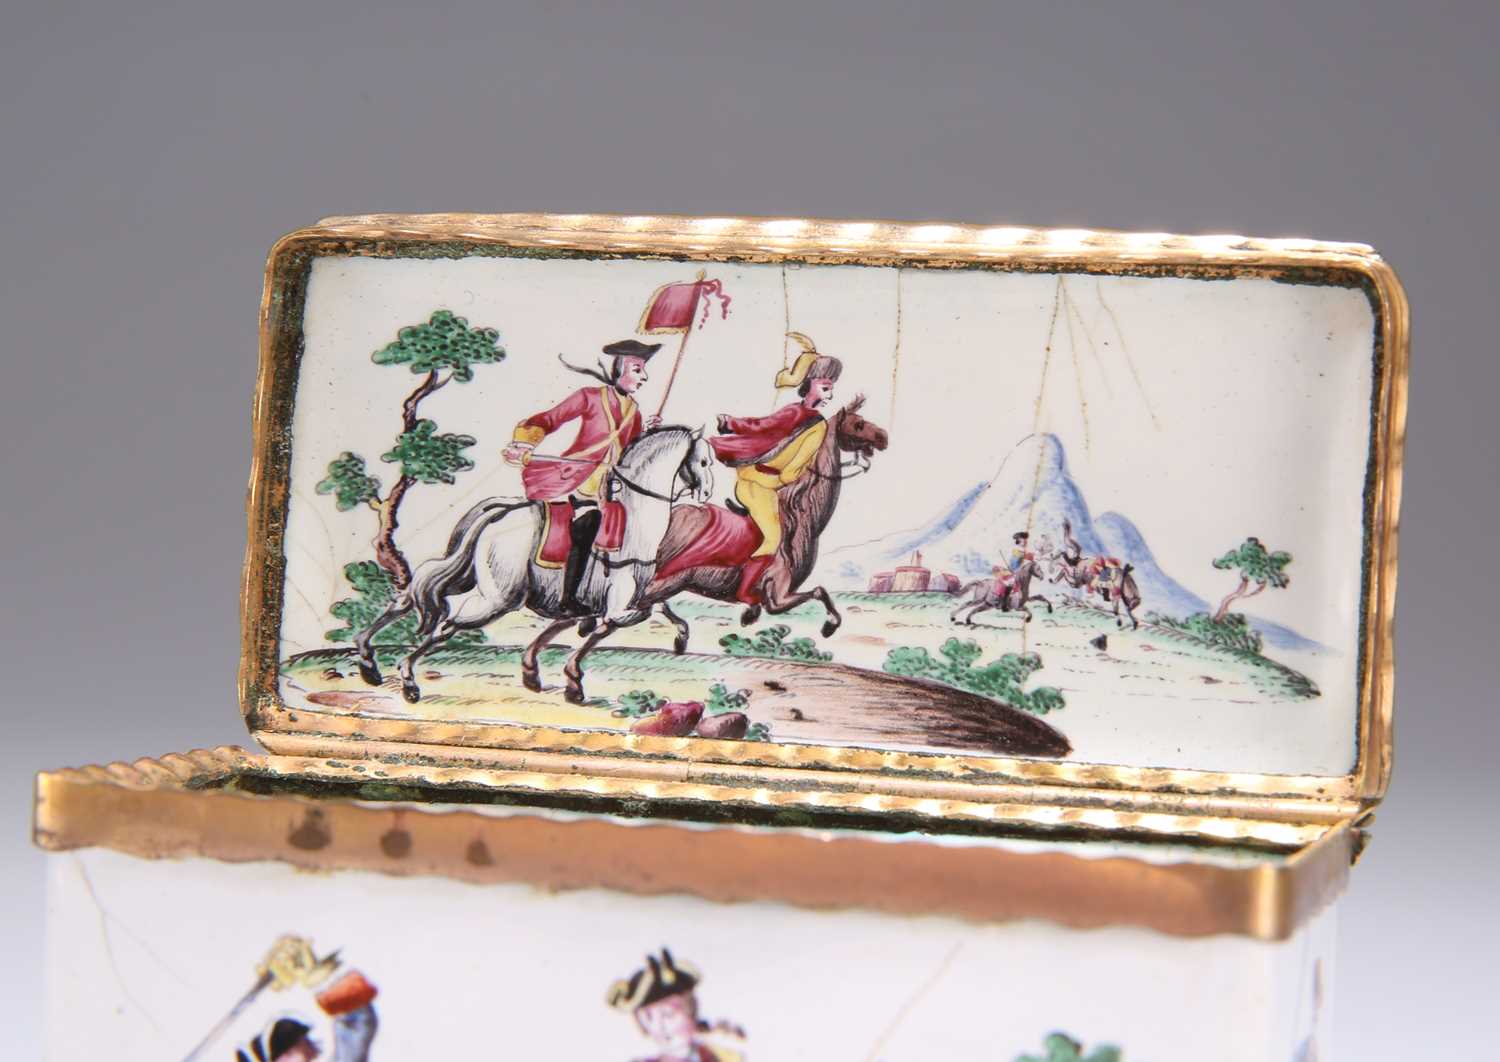 A RARE GERMAN ENAMEL DOUBLE-OPENING SNUFF BOX, FREDERICK THE GREAT, CIRCA 1730 - Image 6 of 7